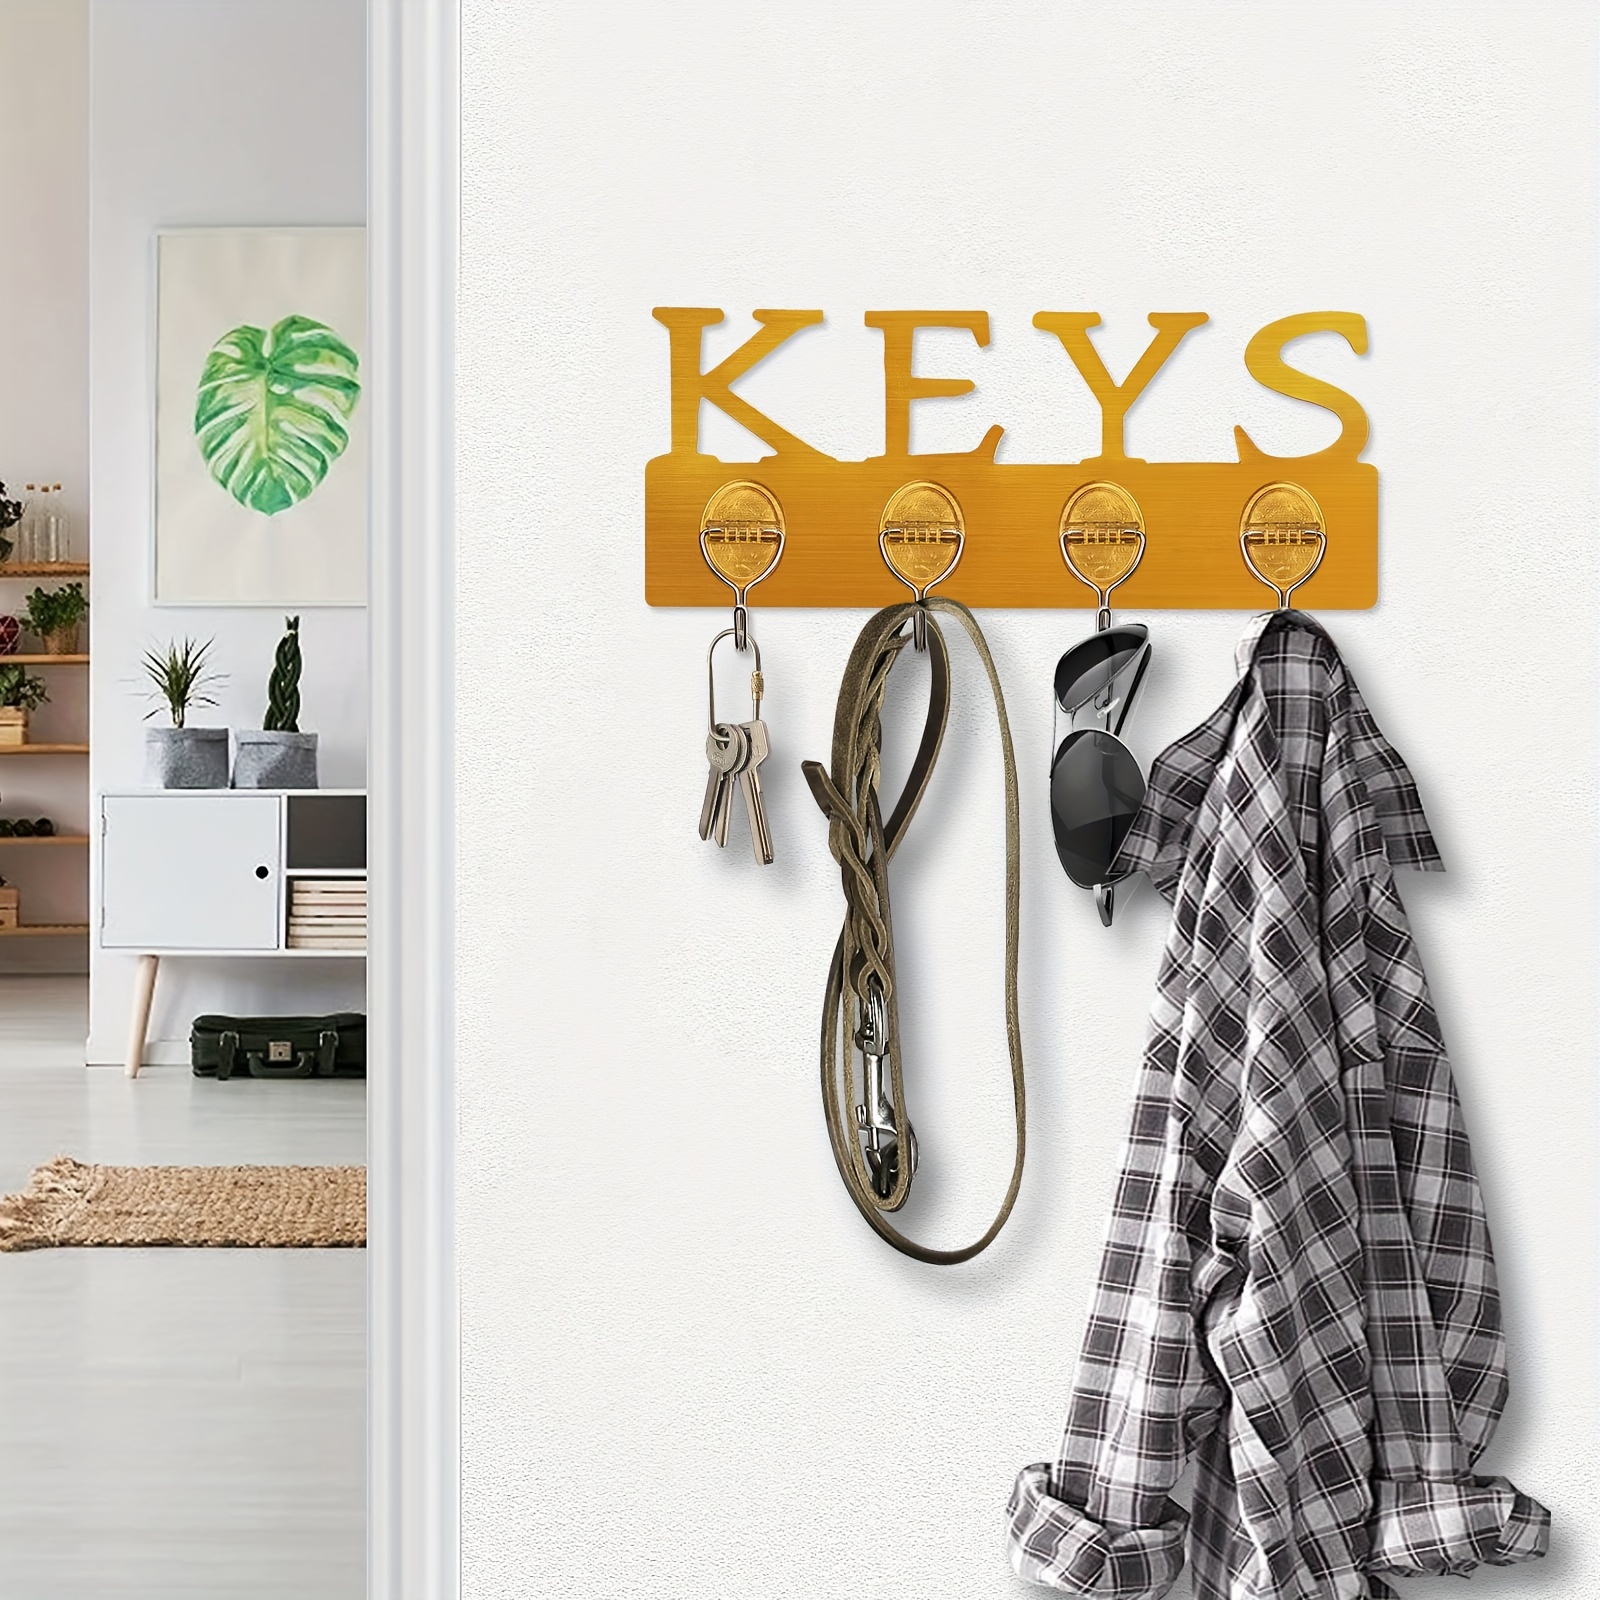  Key Hooks for Wall, Key Holder for Wall Decorative